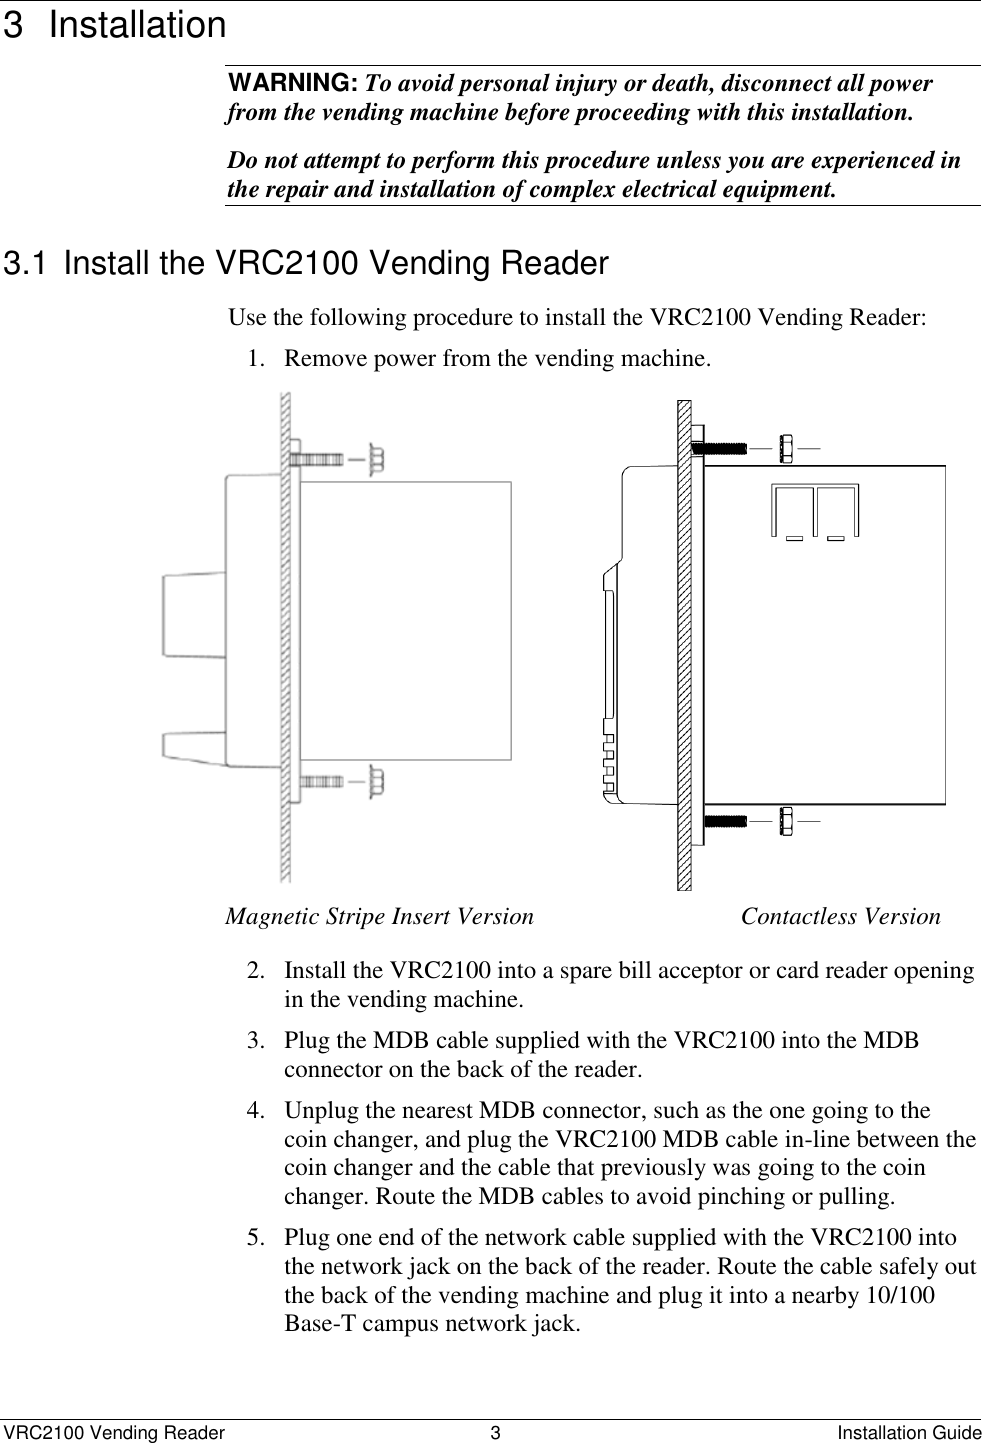  VRC2100 Vending Reader  3  Installation Guide 3  Installation  WARNING: To avoid personal injury or death, disconnect all power from the vending machine before proceeding with this installation. Do not attempt to perform this procedure unless you are experienced in the repair and installation of complex electrical equipment. 3.1 Install the VRC2100 Vending Reader Use the following procedure to install the VRC2100 Vending Reader:  1. Remove power from the vending machine.                              Magnetic Stripe Insert Version                                 Contactless Version 2. Install the VRC2100 into a spare bill acceptor or card reader opening in the vending machine. 3. Plug the MDB cable supplied with the VRC2100 into the MDB connector on the back of the reader. 4. Unplug the nearest MDB connector, such as the one going to the coin changer, and plug the VRC2100 MDB cable in-line between the coin changer and the cable that previously was going to the coin changer. Route the MDB cables to avoid pinching or pulling. 5. Plug one end of the network cable supplied with the VRC2100 into the network jack on the back of the reader. Route the cable safely out the back of the vending machine and plug it into a nearby 10/100 Base-T campus network jack. 